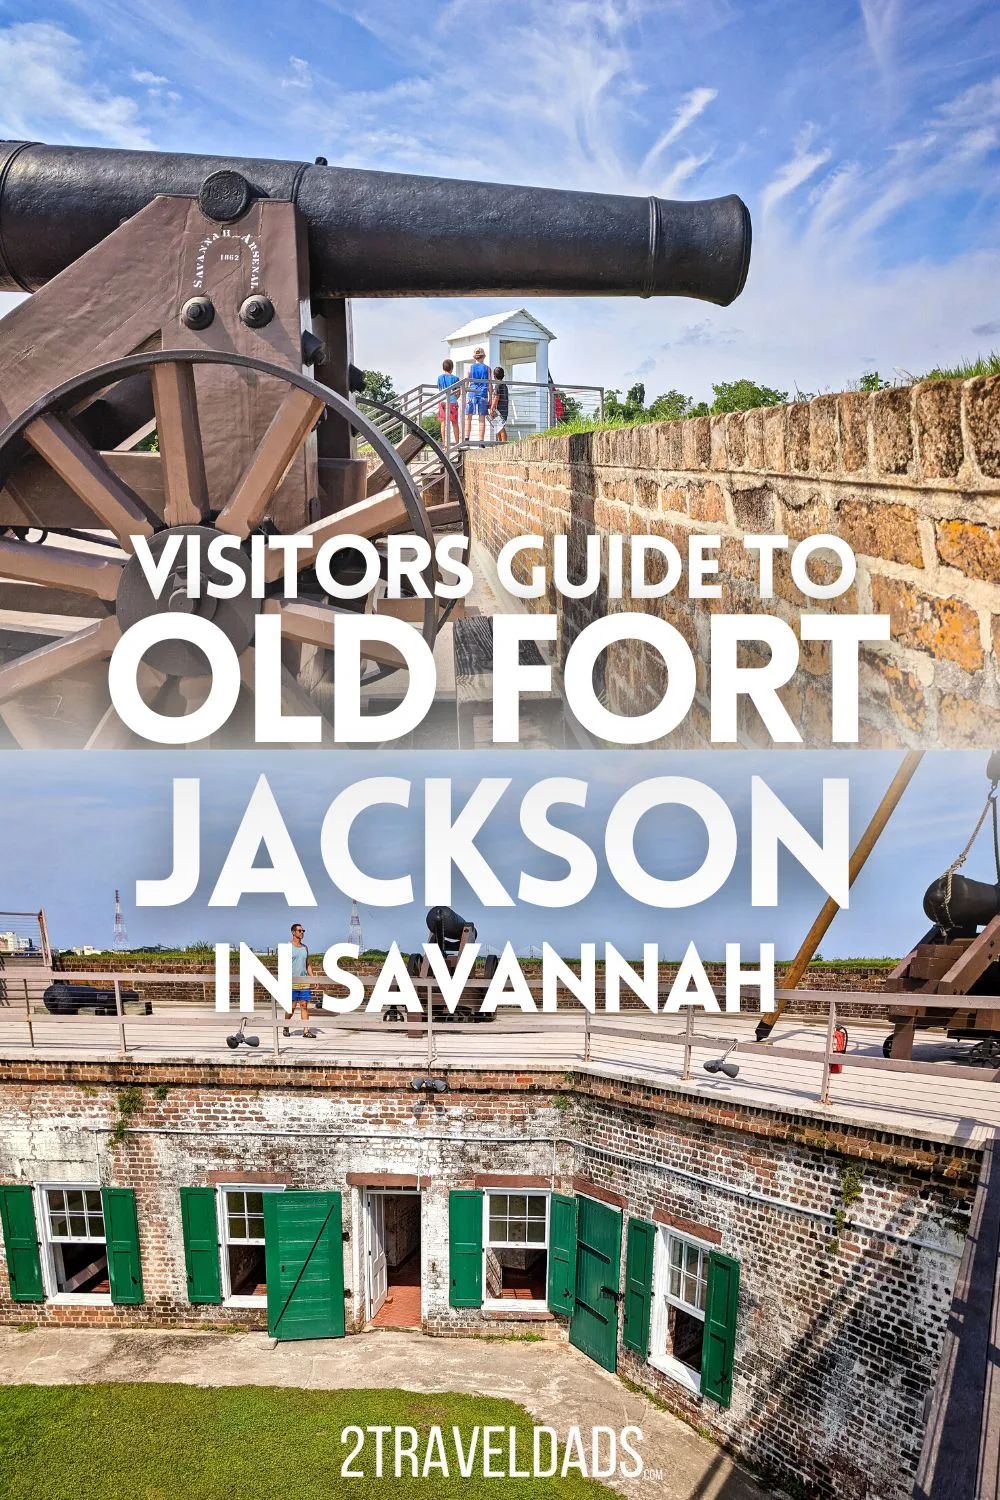 The closest Civil War fortress to Savannah, Old Fort Jackson is easy to visit when you're in Savannah. Find out what you'll see, check out the living history and get a different insight into the historic side of the area. All the need to know tips here.